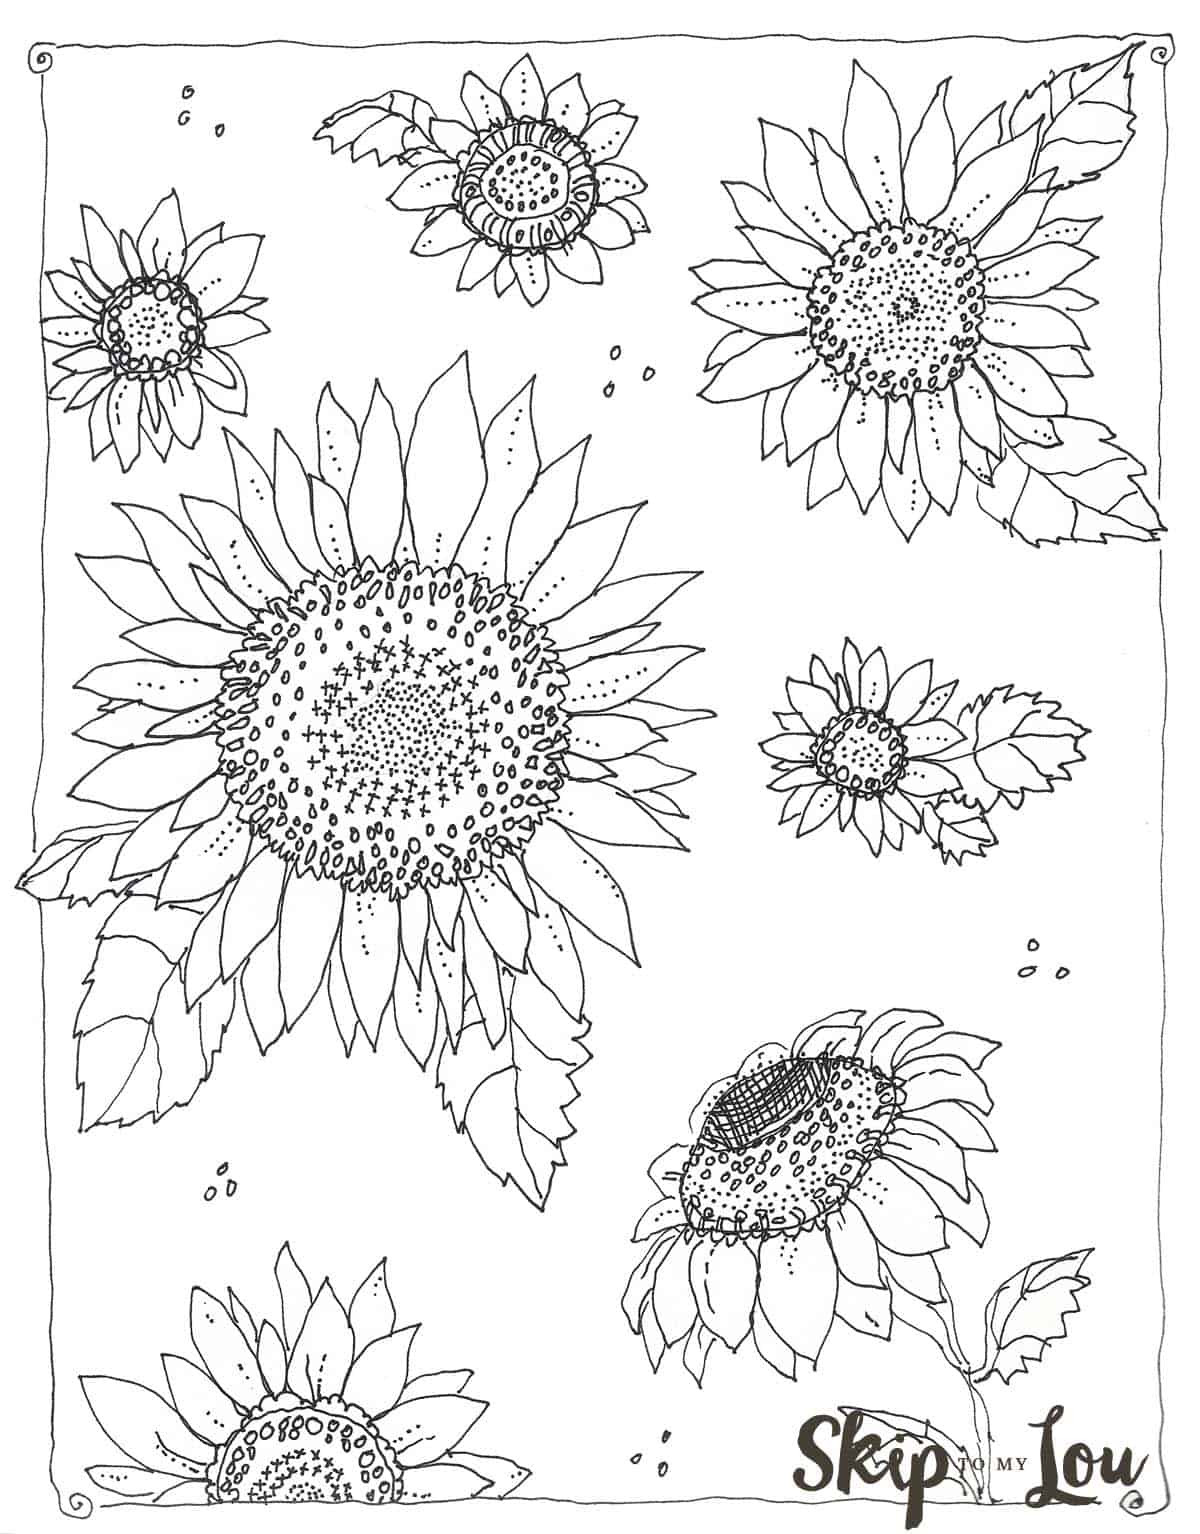 Sunflower Coloring Pages Printable
 Kansas Day Sunflower Coloring Page